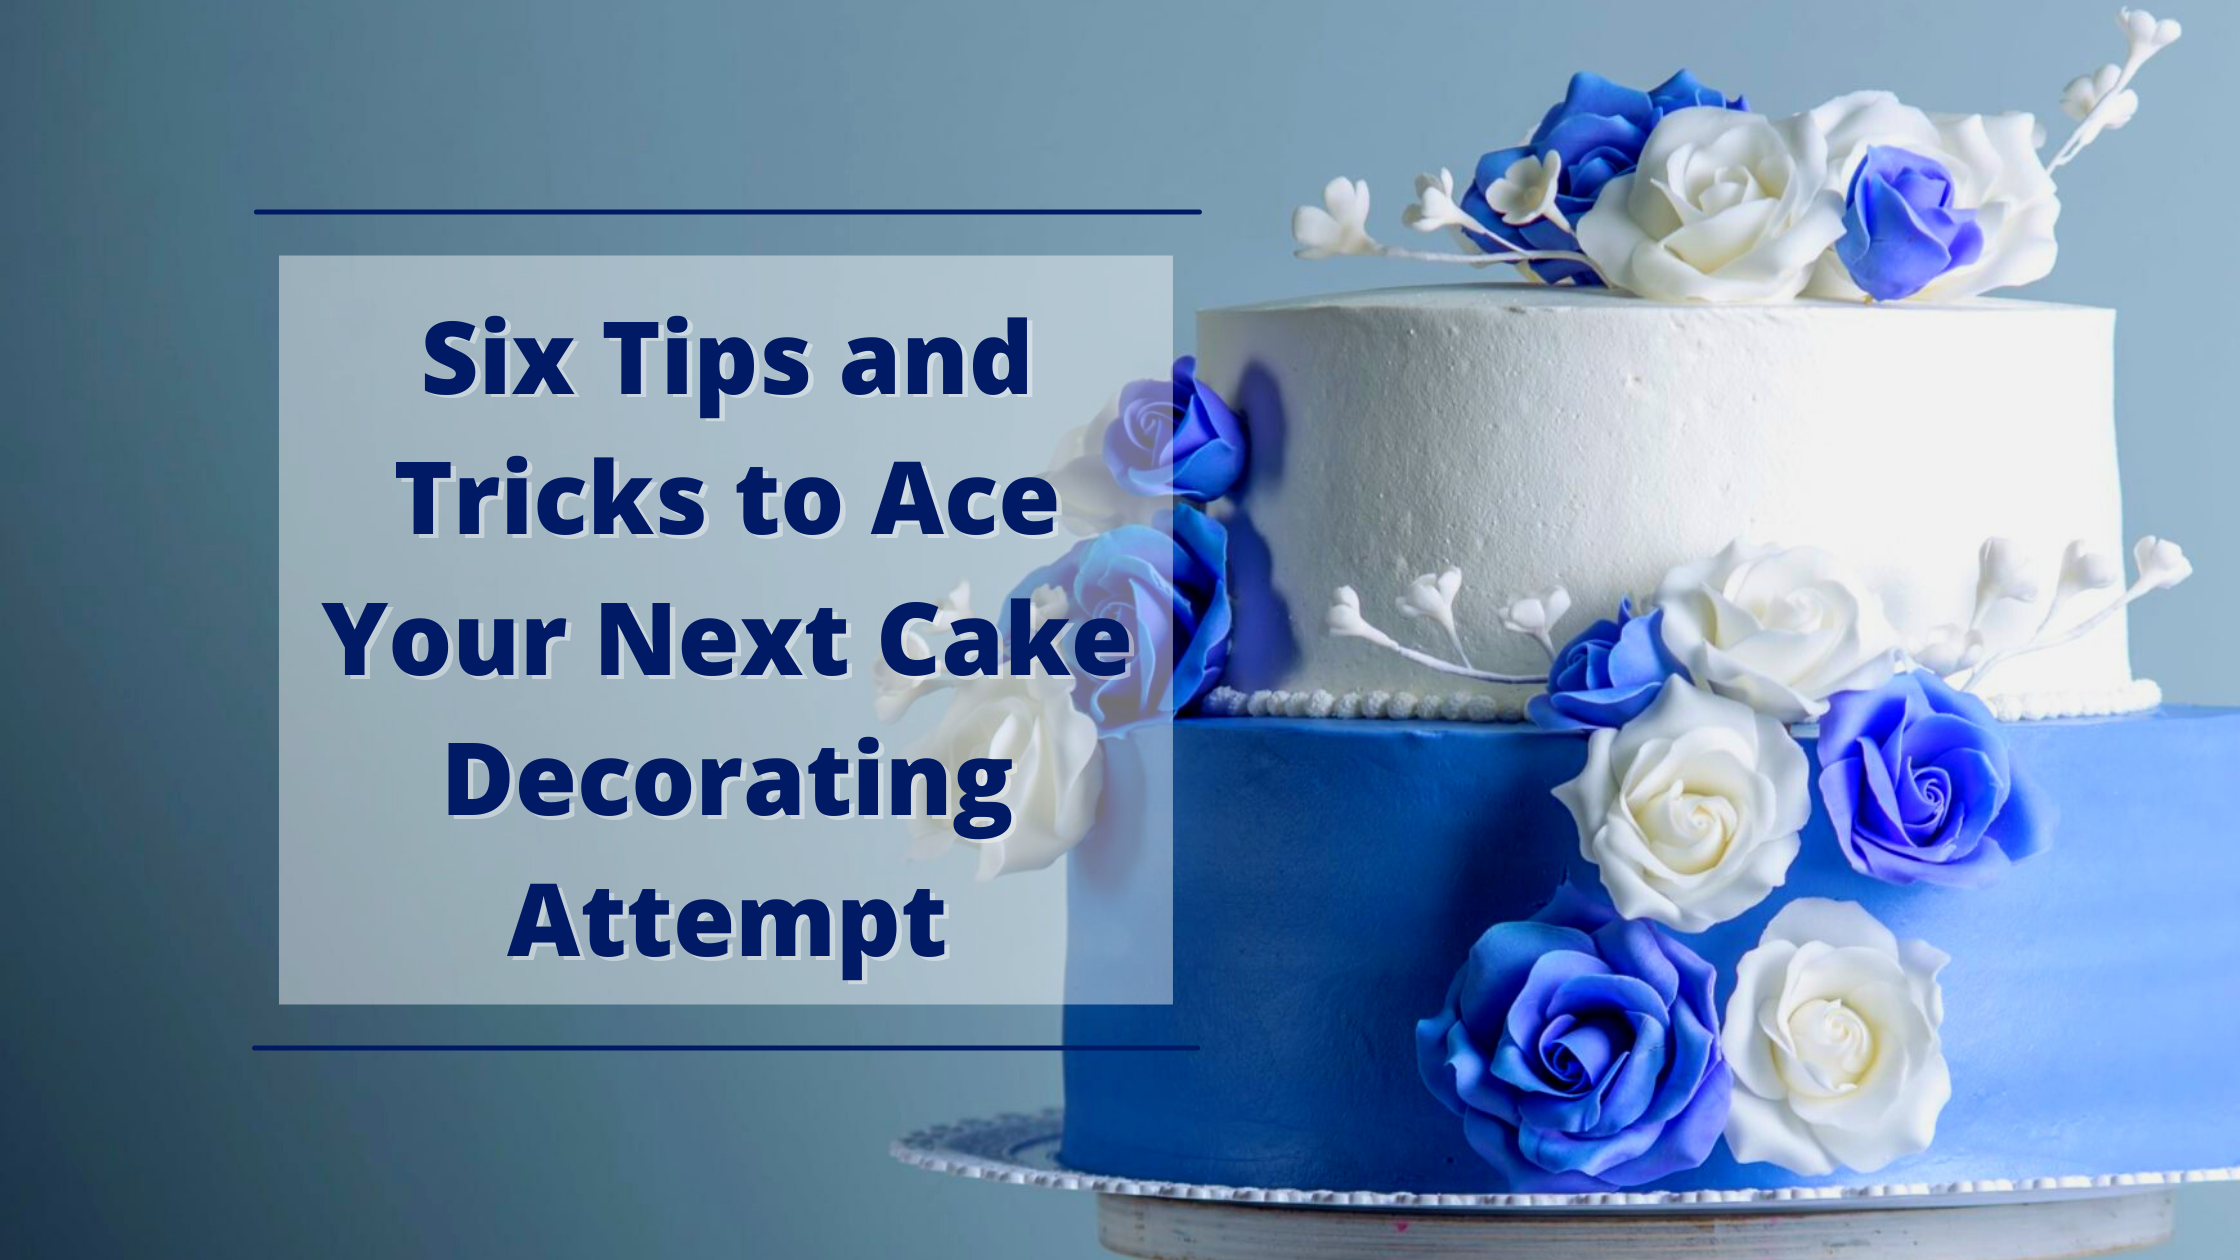 Six Tips and Tricks to Ace Your Next Cake Decorating Attempt